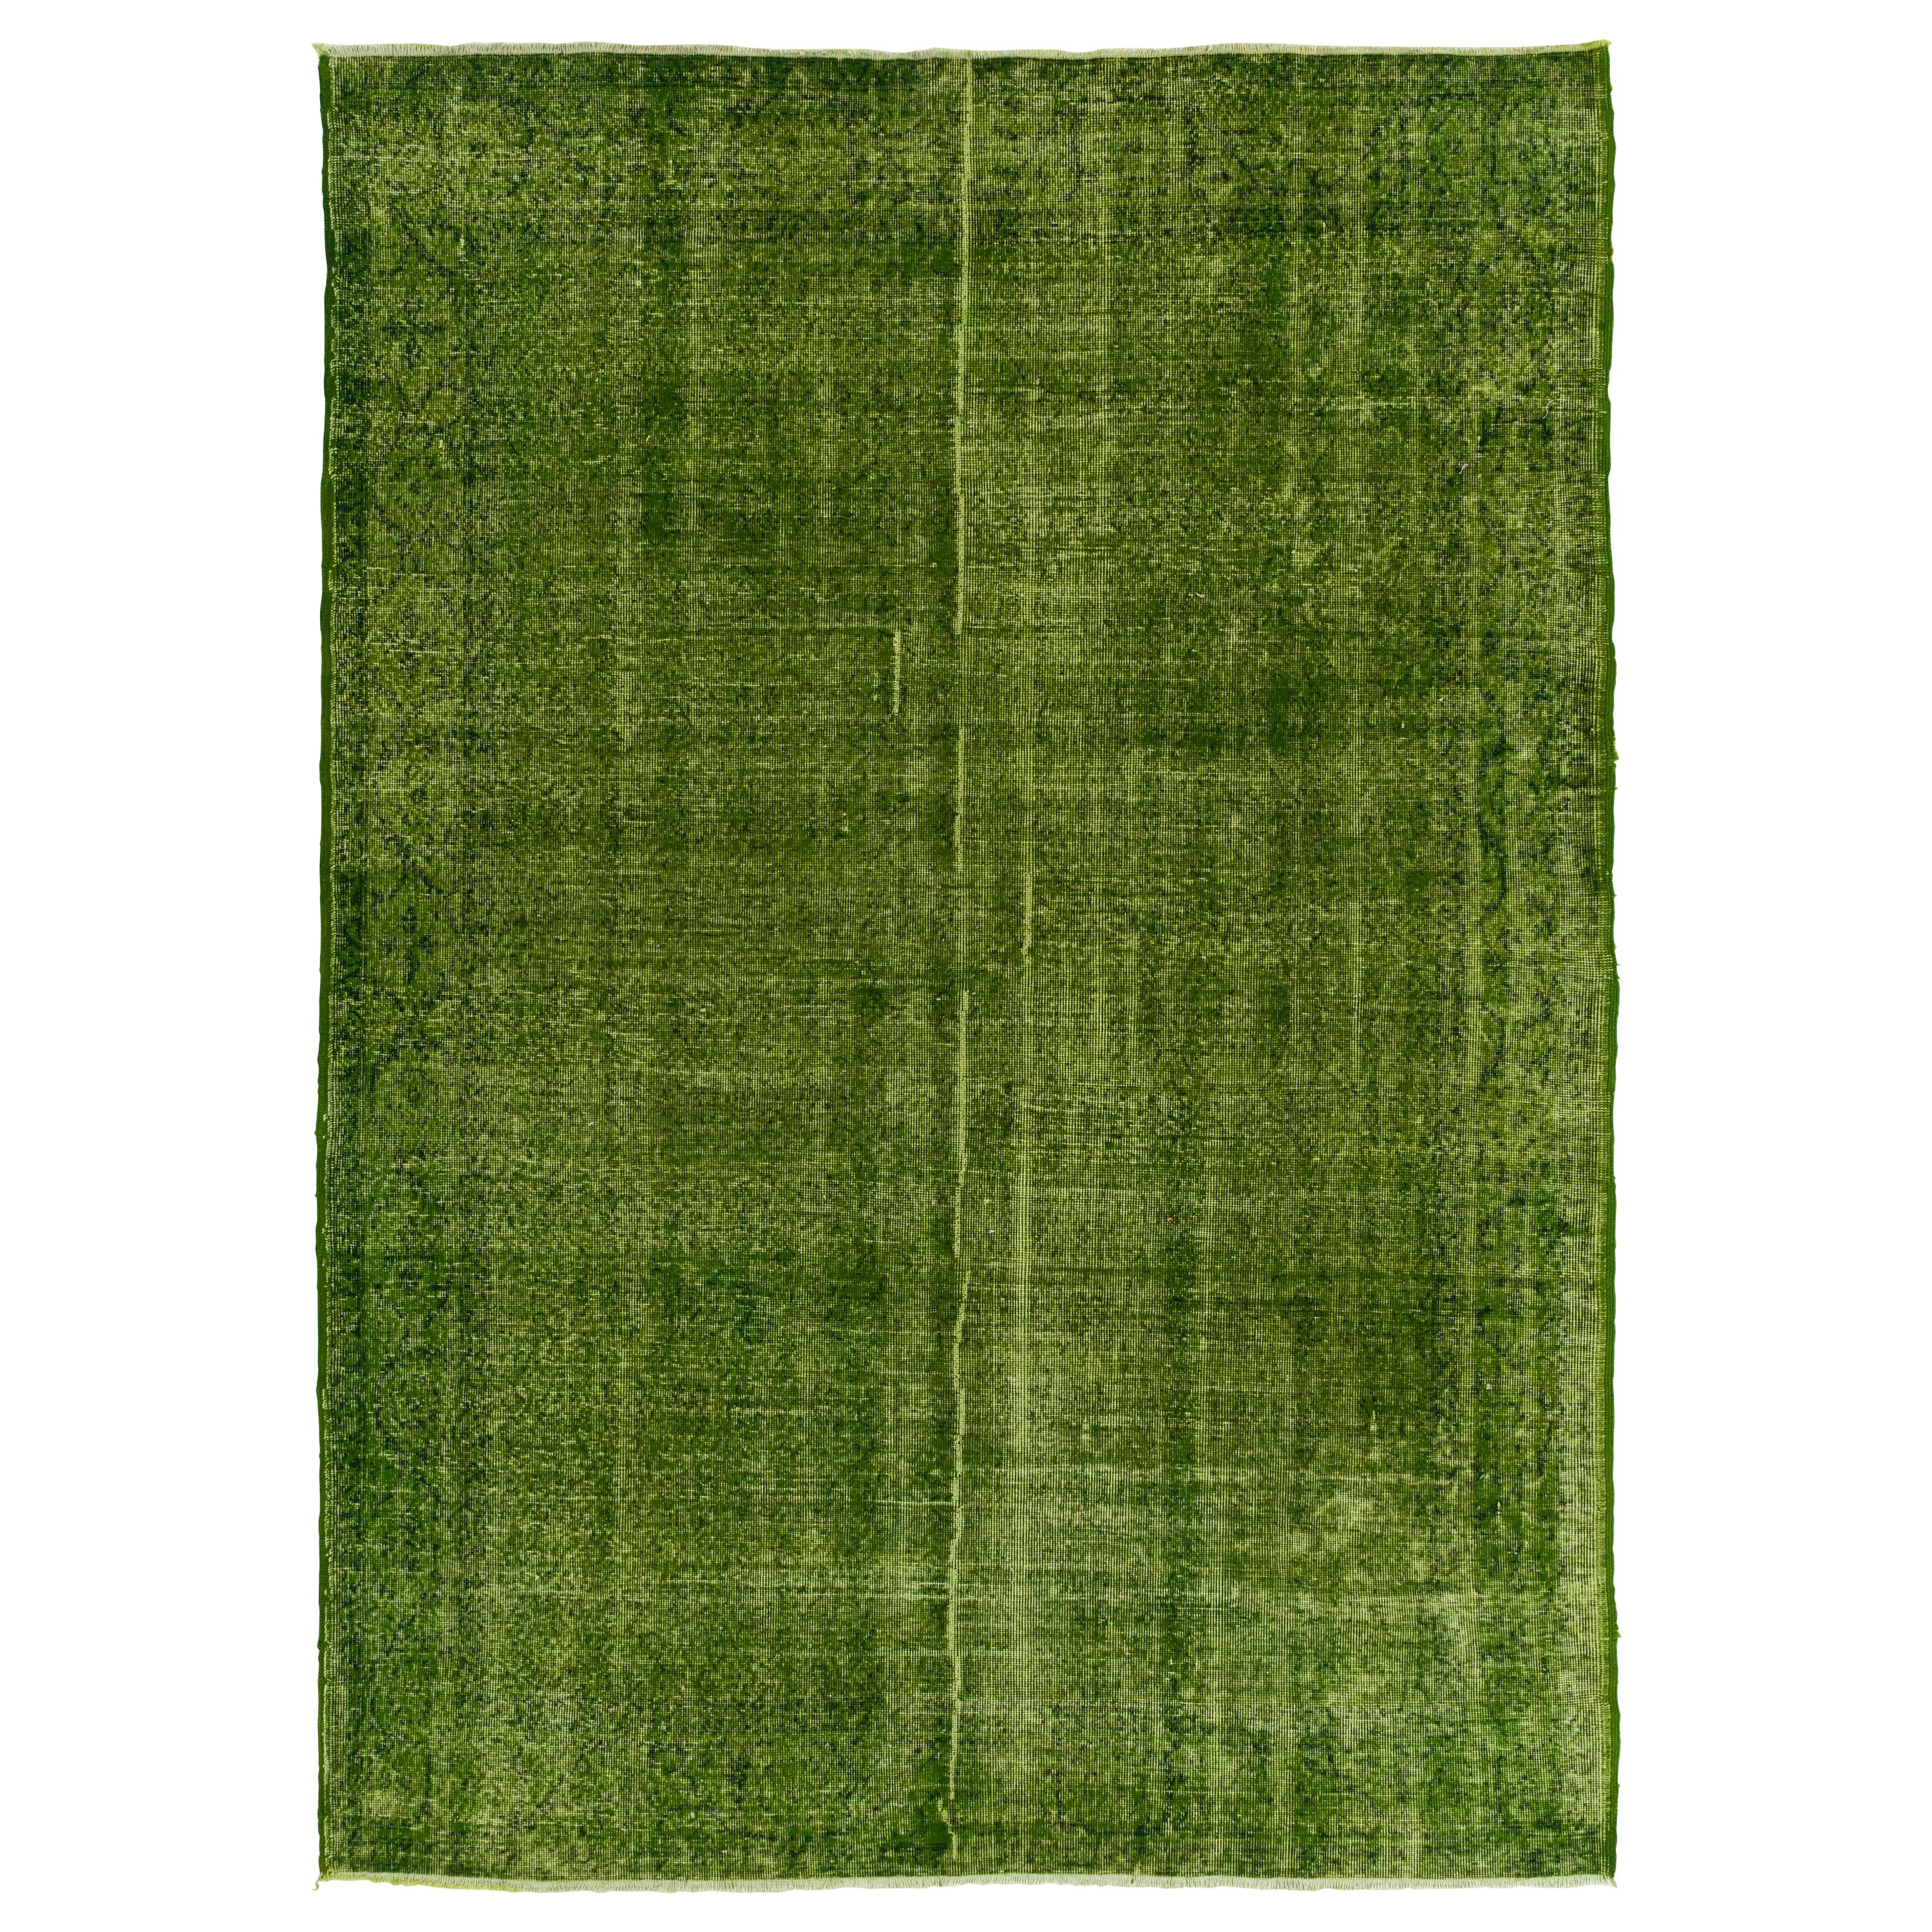 6.8x10 Ft Vintage Wool Rug OverDyed in Green Color. Great 4 Modern Interiors